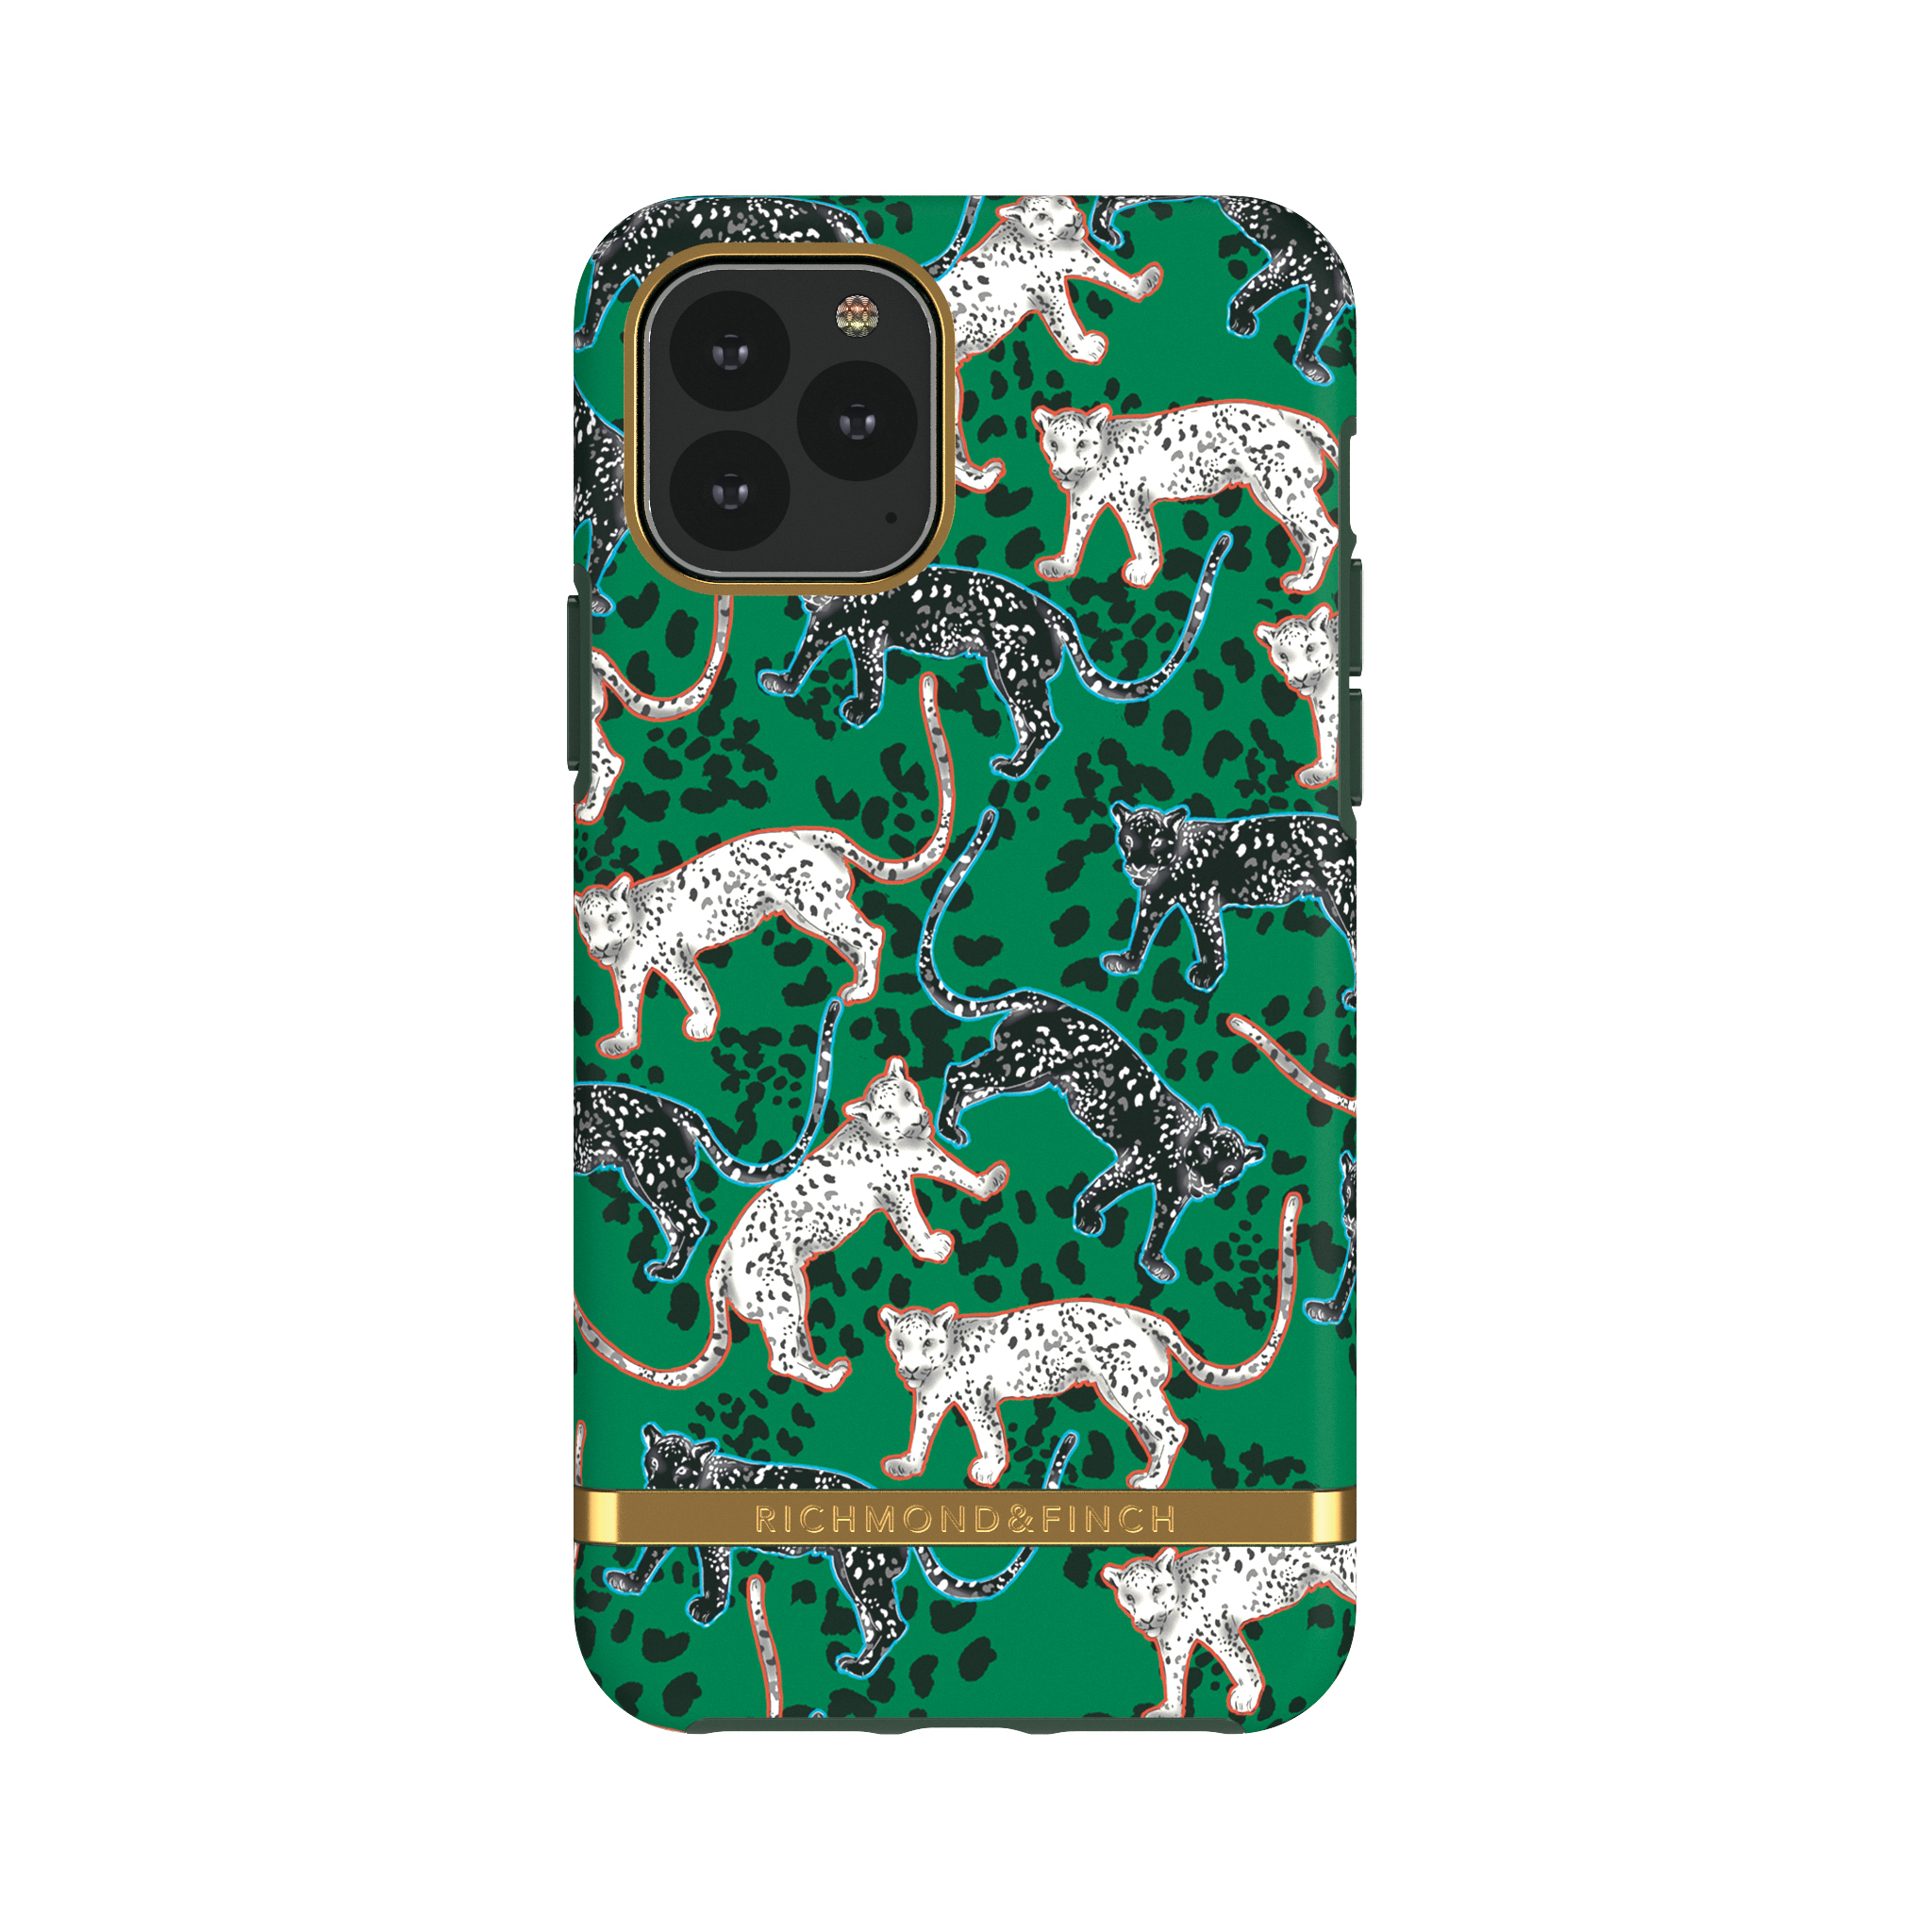 Green Pro IPHONE GREEN MAX, Leopard FINCH APPLE, Max, RICHMOND & 11 Backcover, PRO 11 iPhone